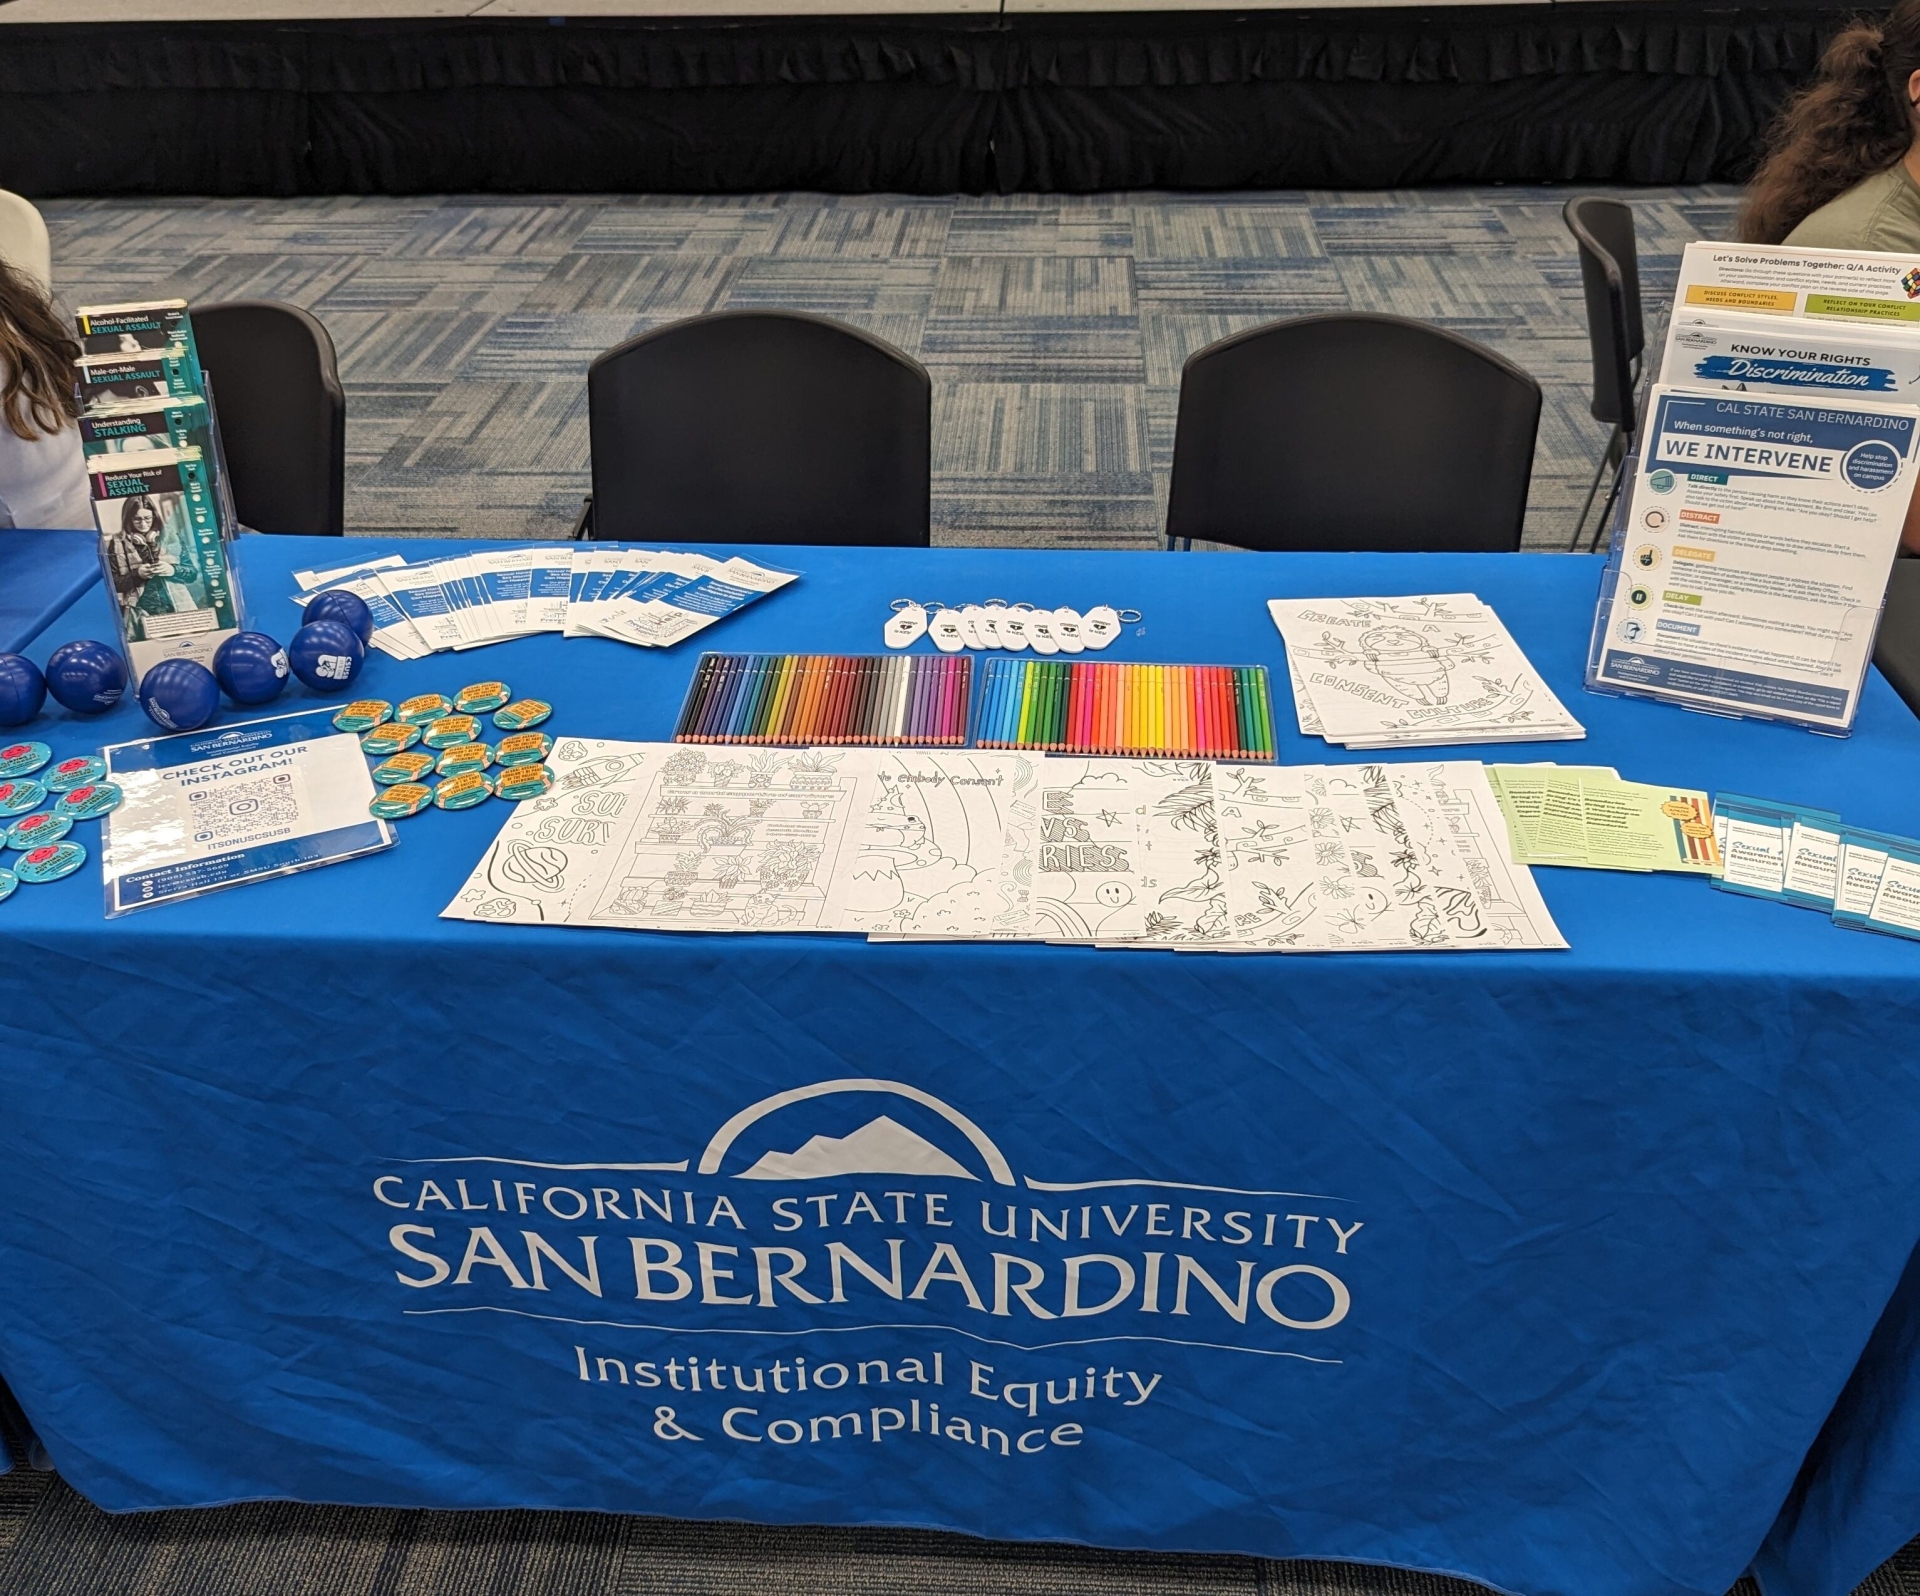 Table at resource fair, with coloring pages, swag items, and educational materials. Tablecloth reads "Institutional Equity and Compliance"